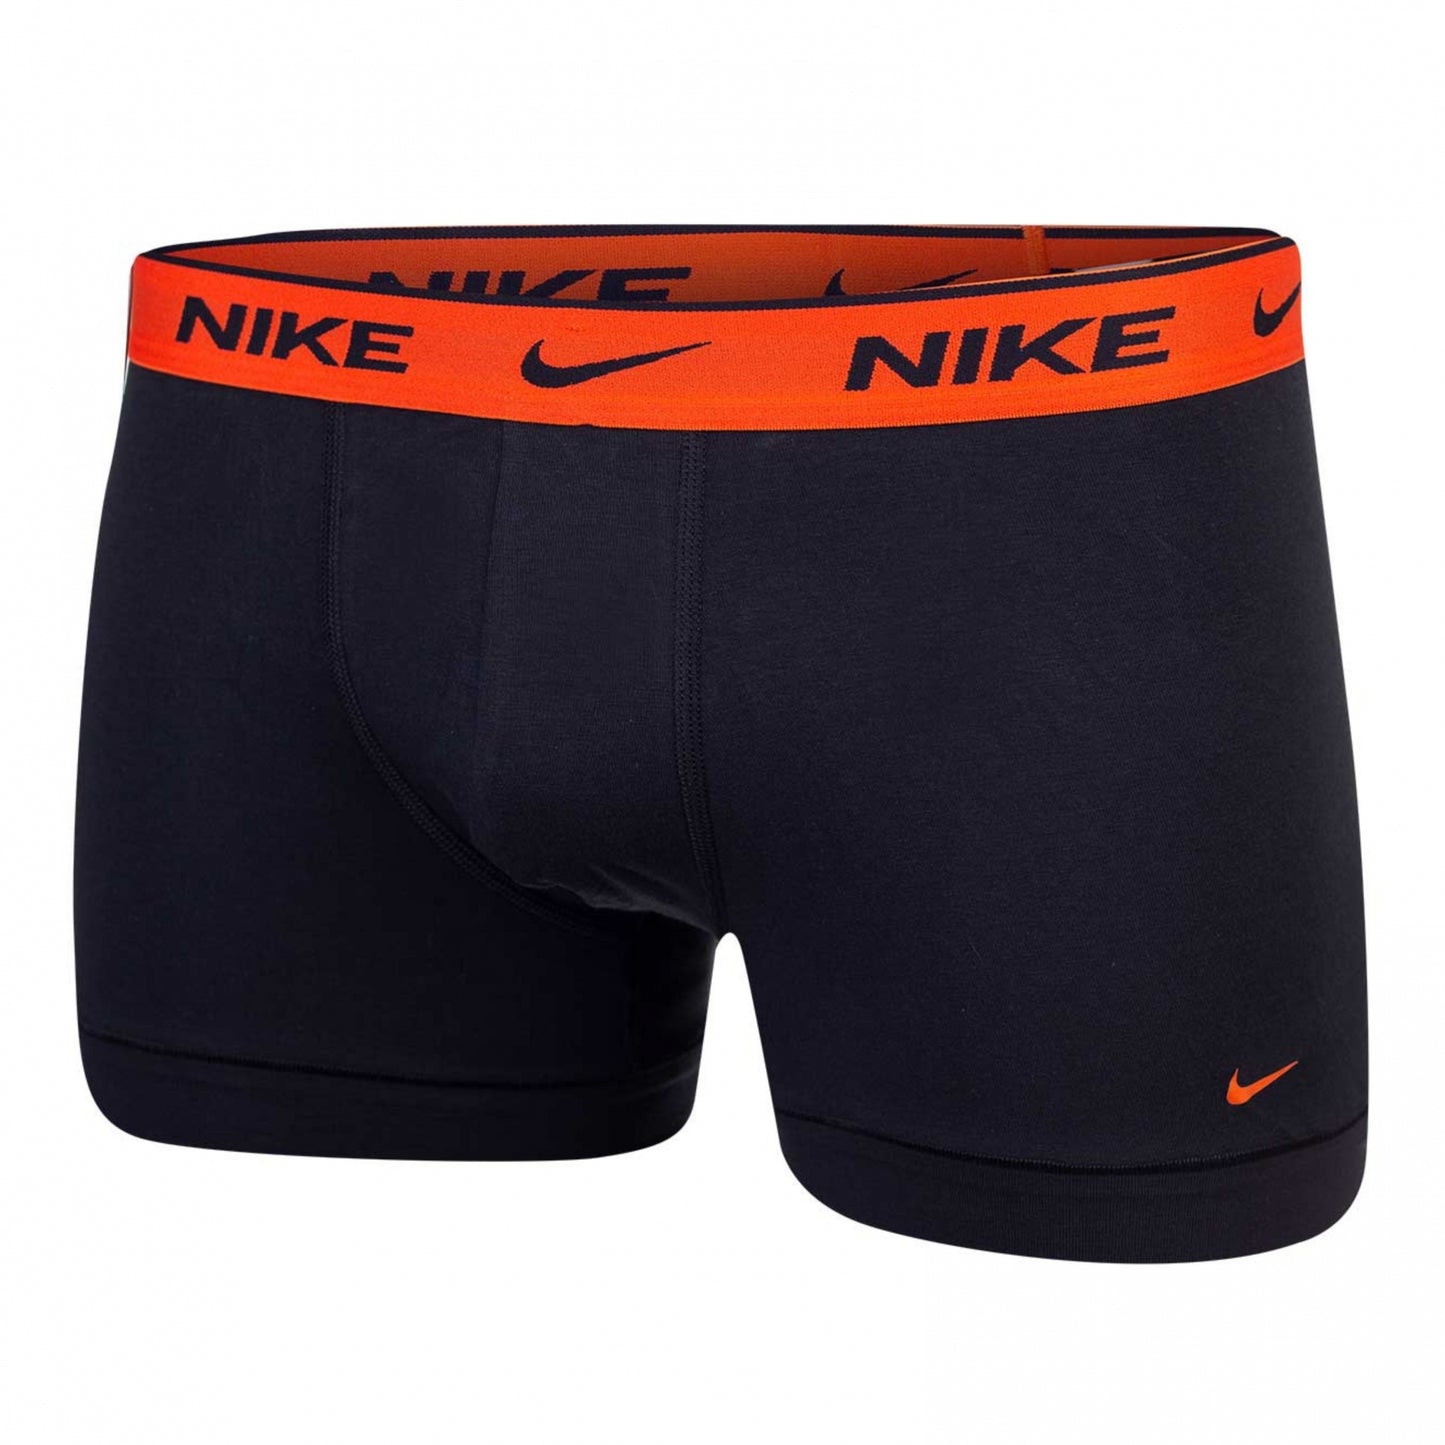 Boxer Nike Trunk 2 Pack